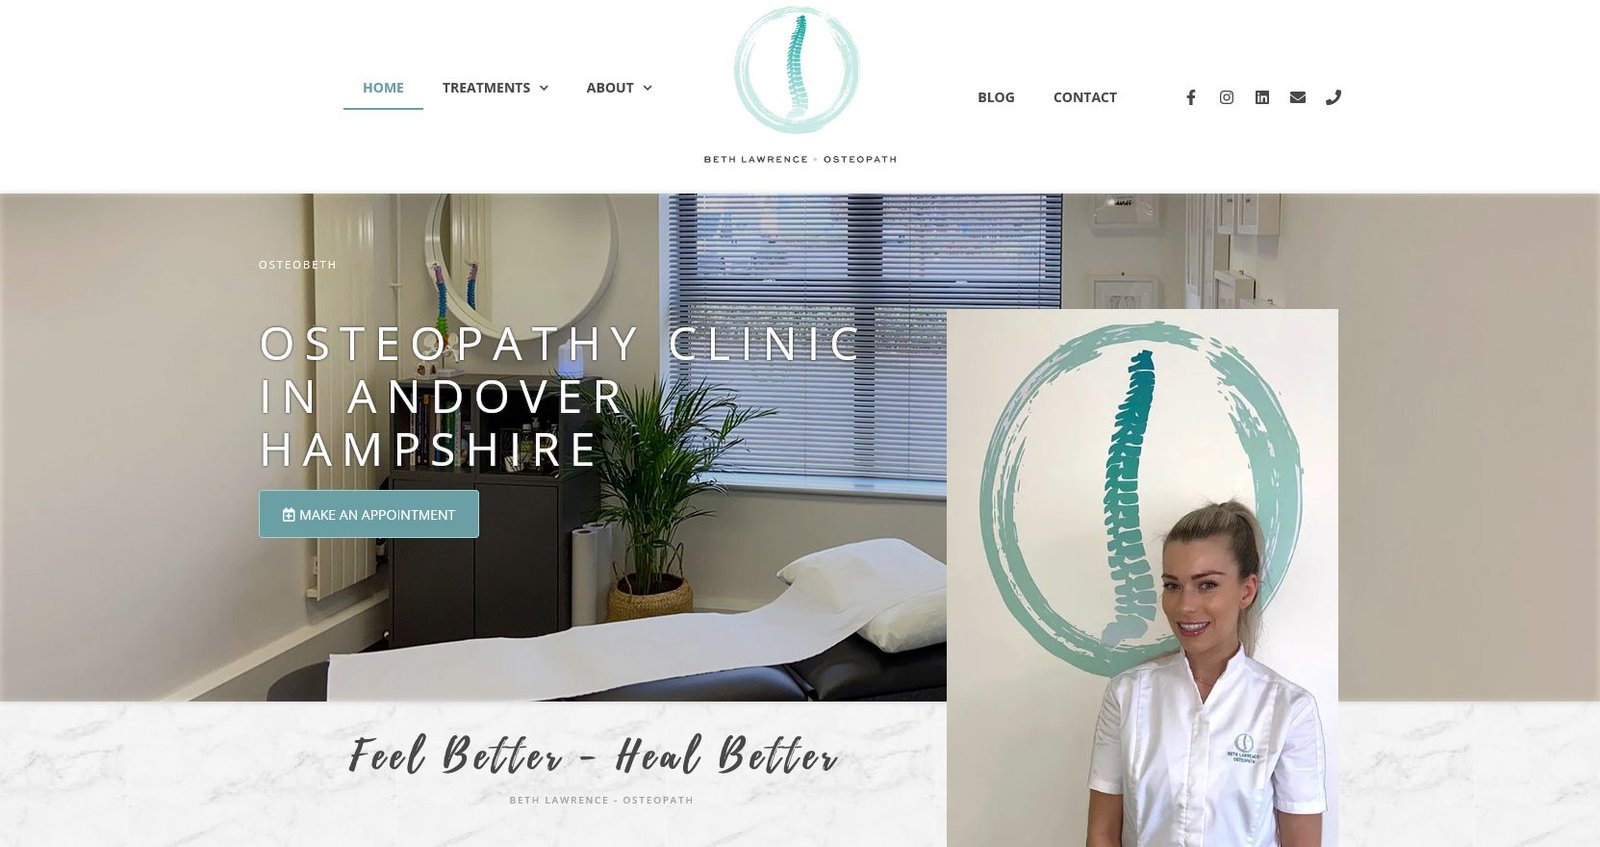 website design example - Osteobeth osteopathy clinic in Andover by Ian Middleton